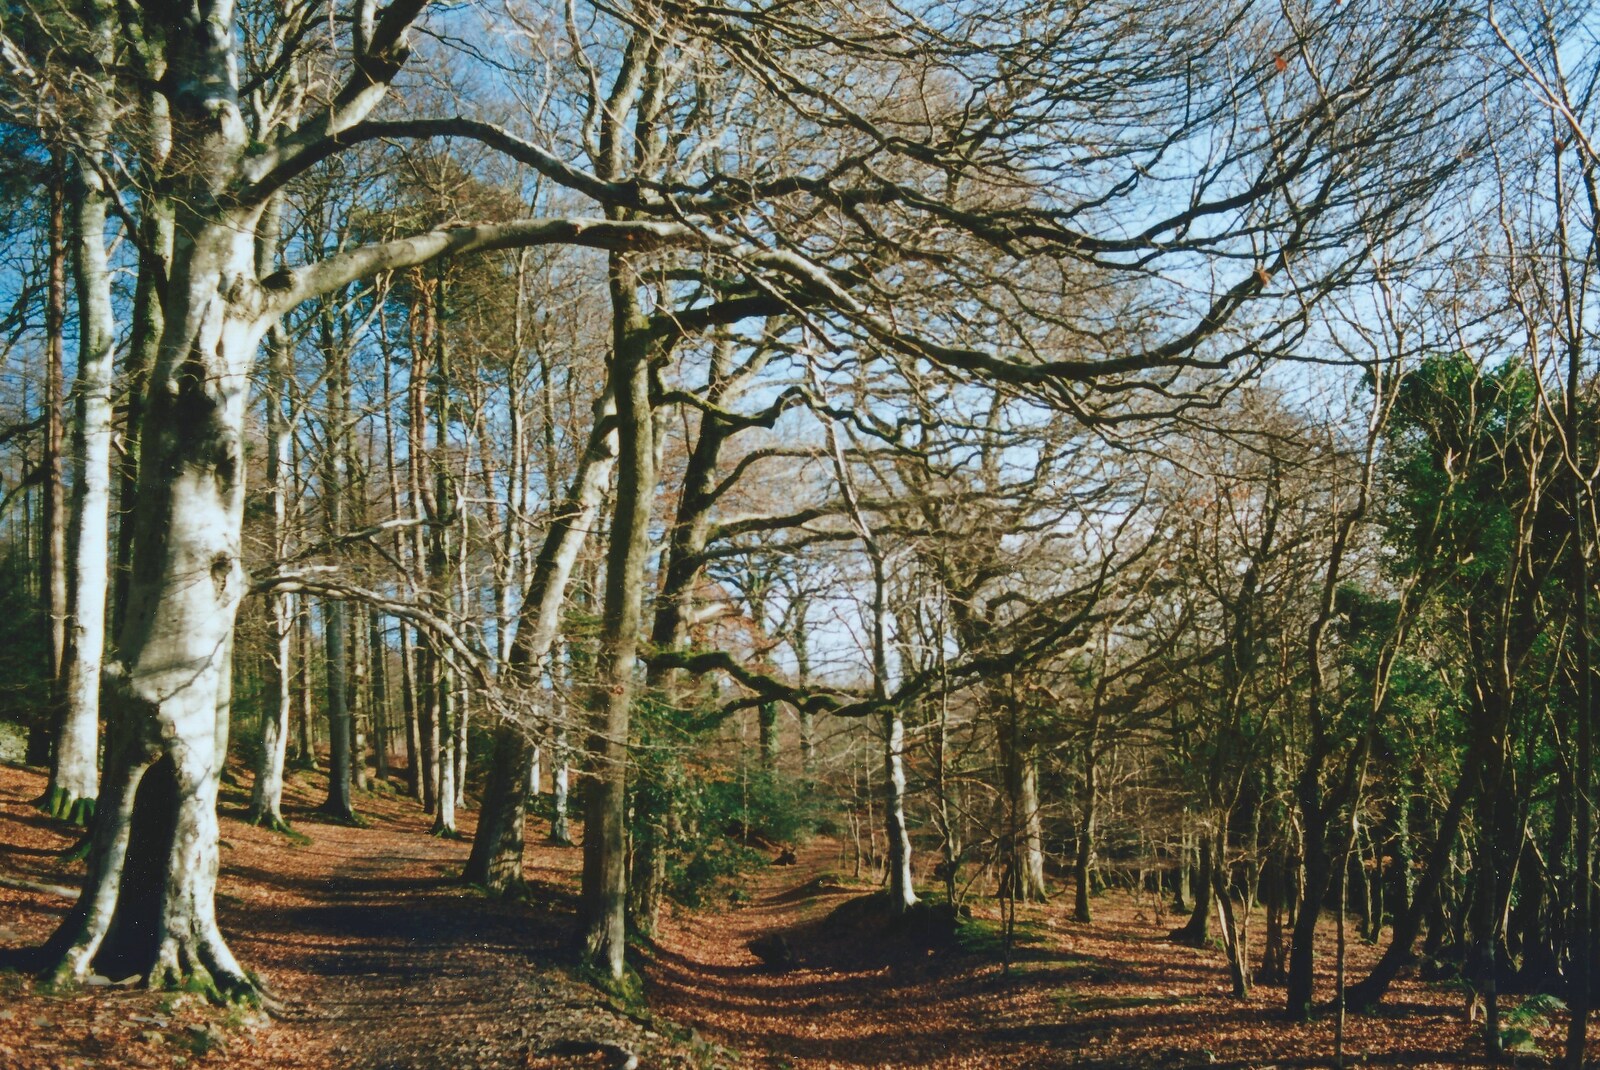 A winter wood in the Plym Valley from Uni: A Ride on the Plym Valley Cycle Path, Plymstock, Devon - 26th February 1989